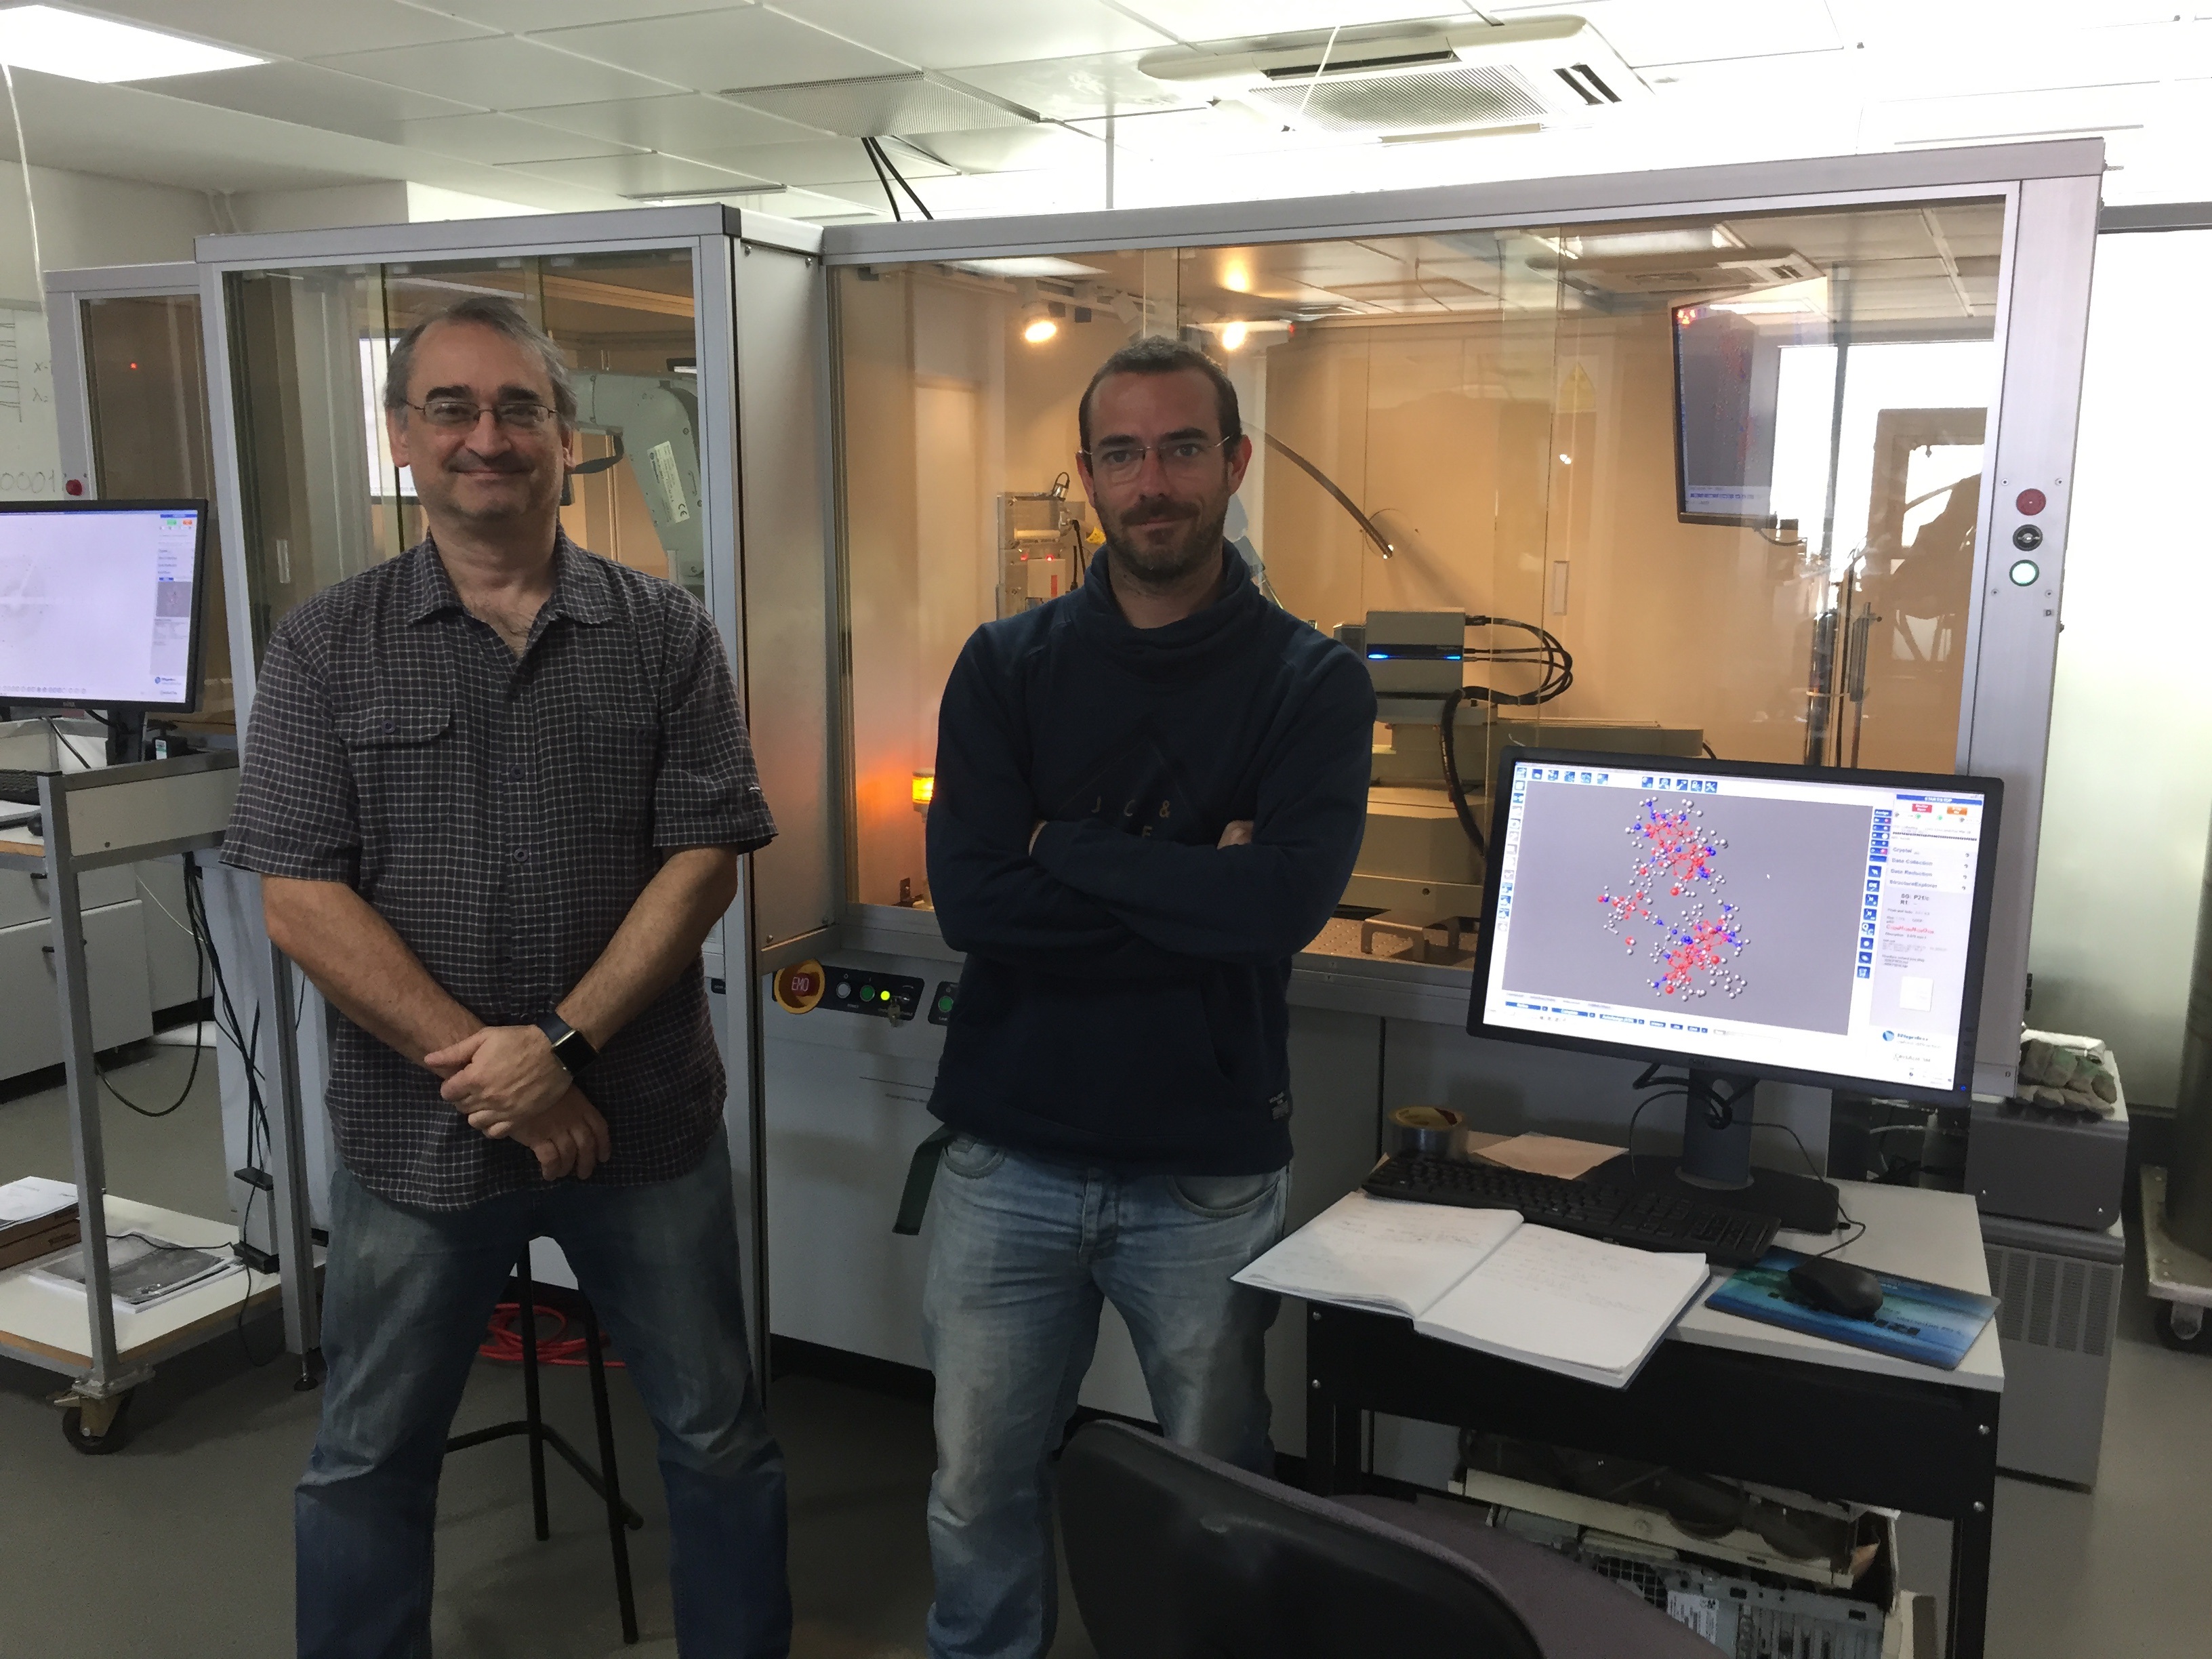 Drs. Christopher Muryn and Inigo Vitorica-Yrezabal of the The University of Manchester with the Rigaku XtaLAB FR-X DW X-ray diffractometer system